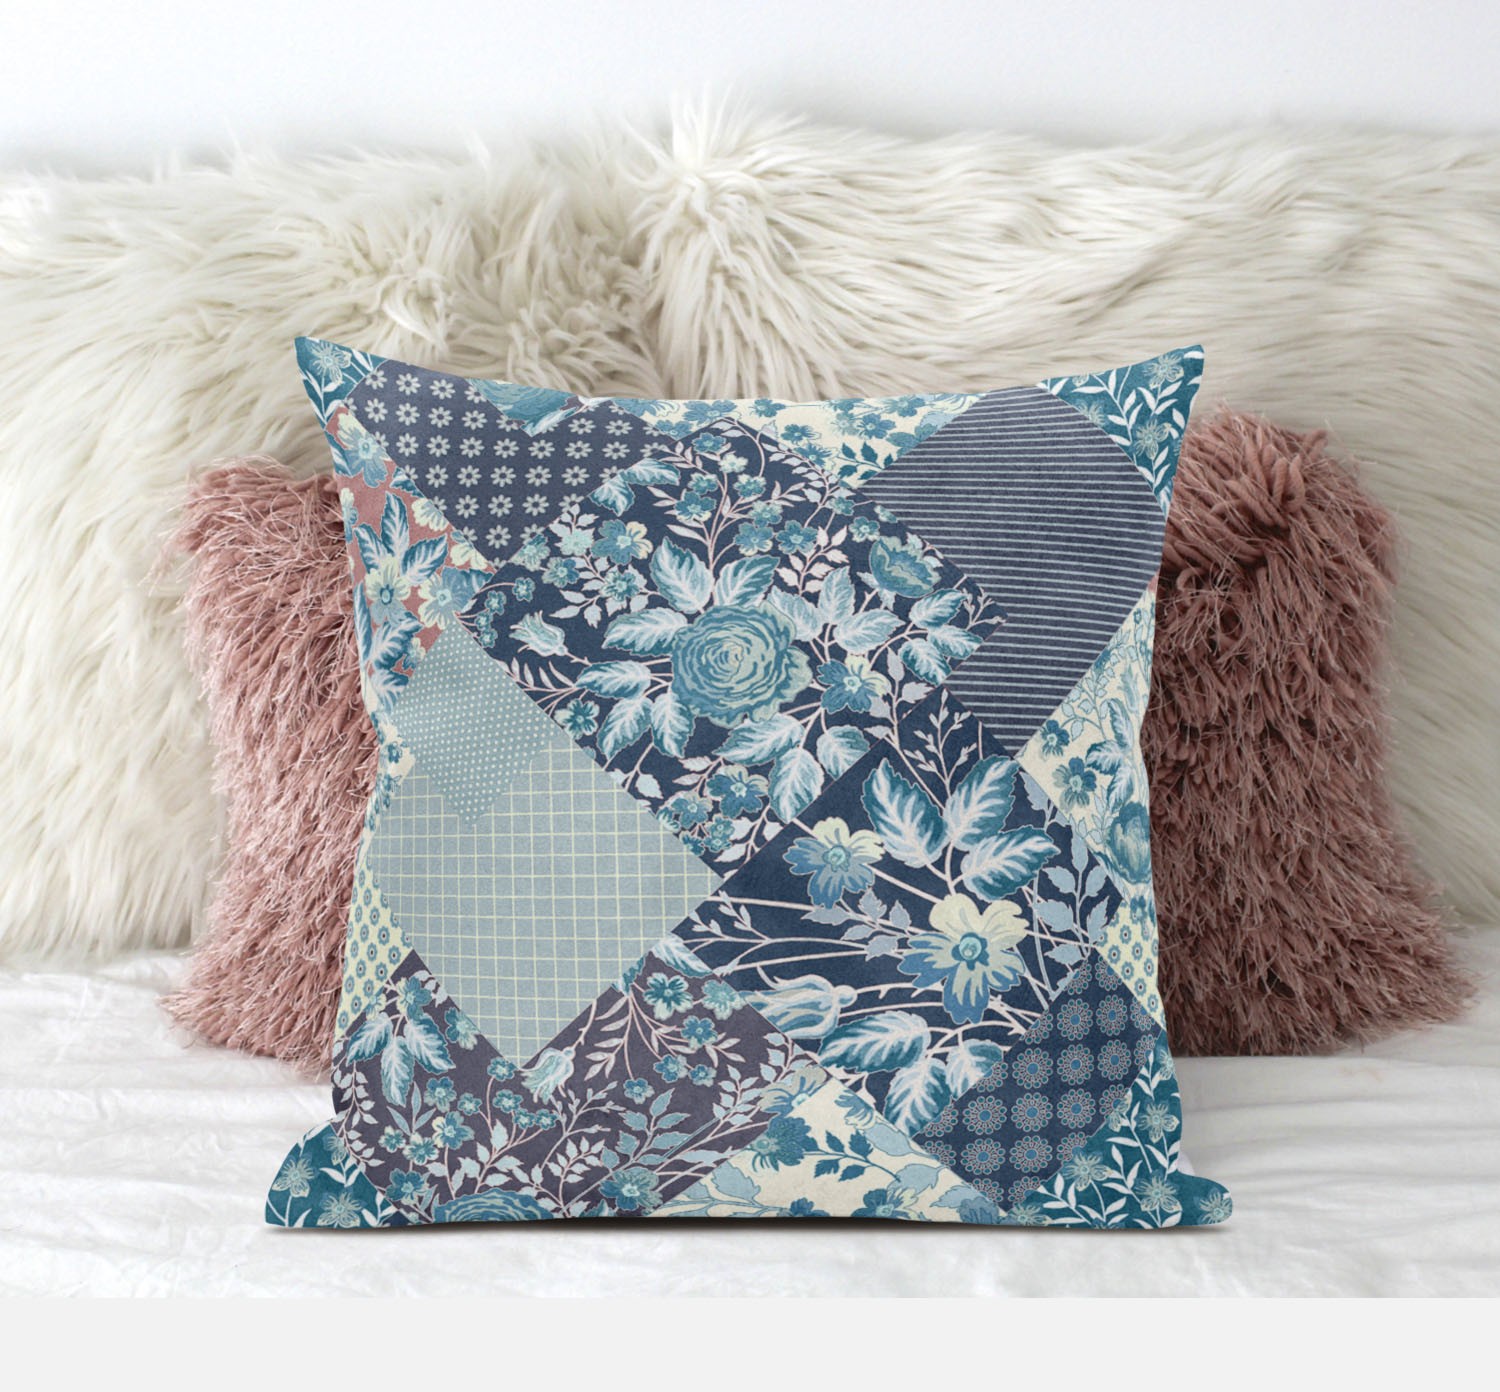 20" Blue White Floral Suede Throw Pillow-411434-1